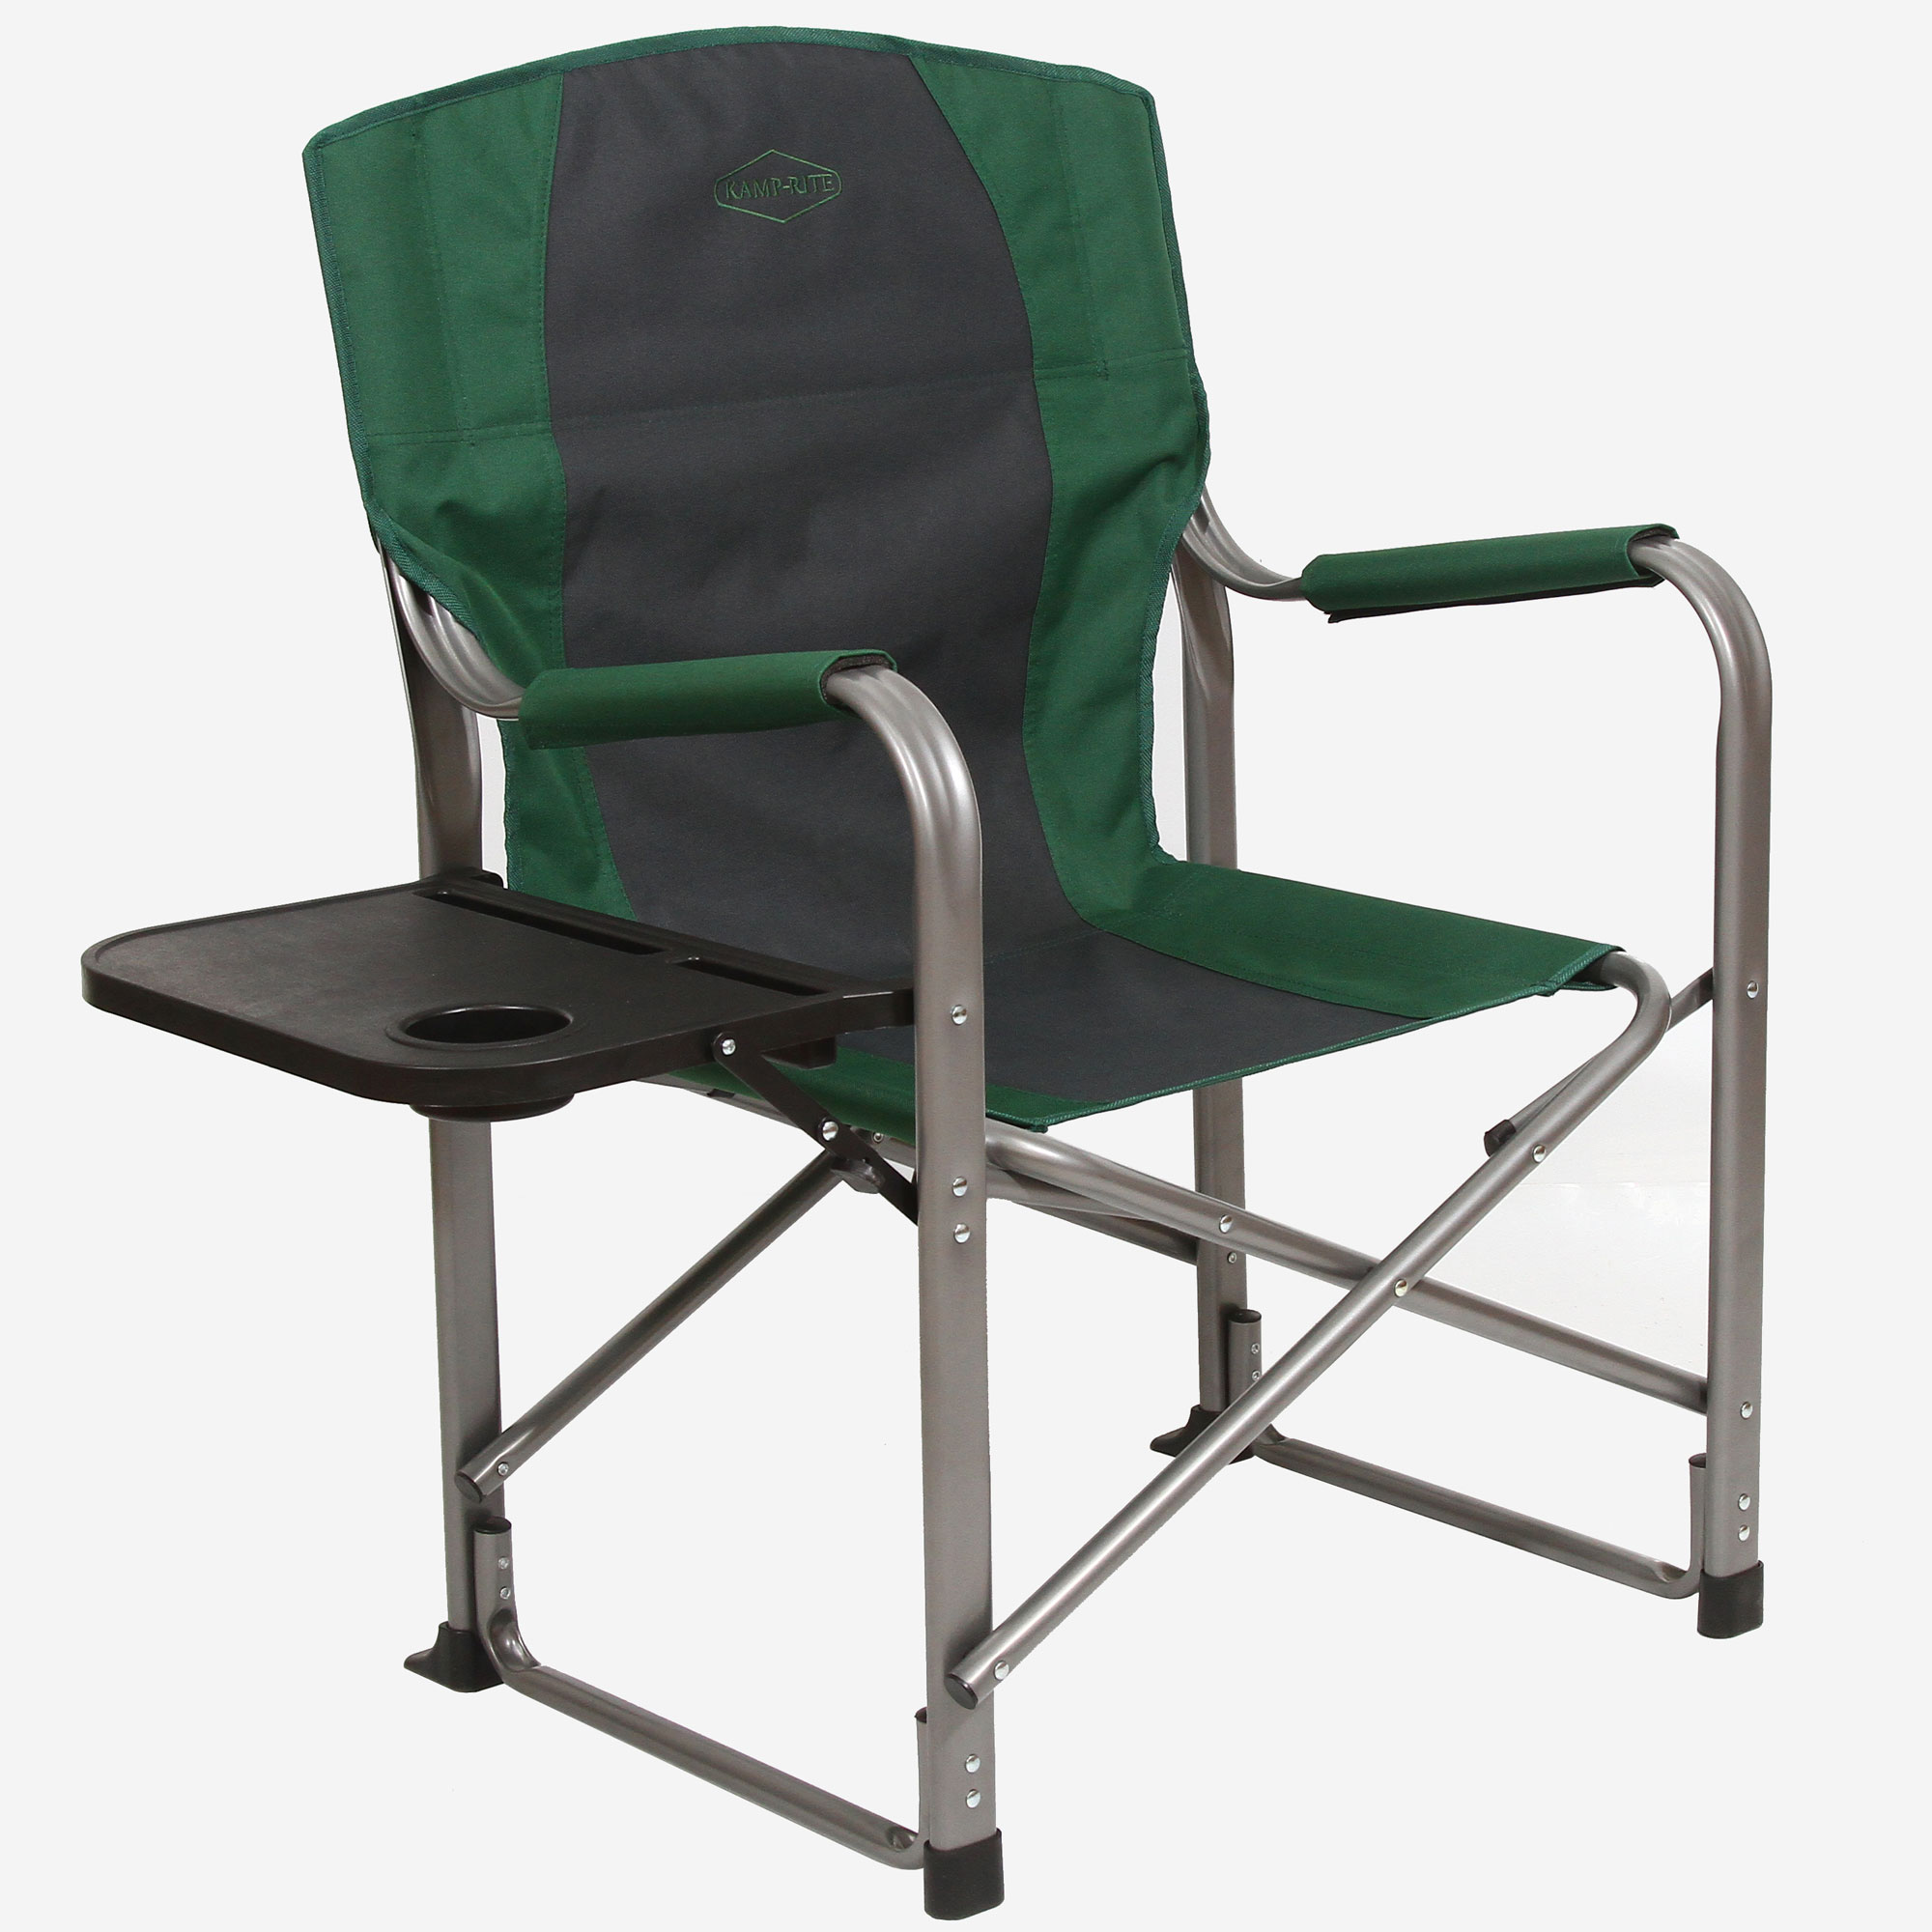 Kamp-Rite Director's Chair Outdoor Camping Folding Chair with Side Table, Green - image 1 of 4